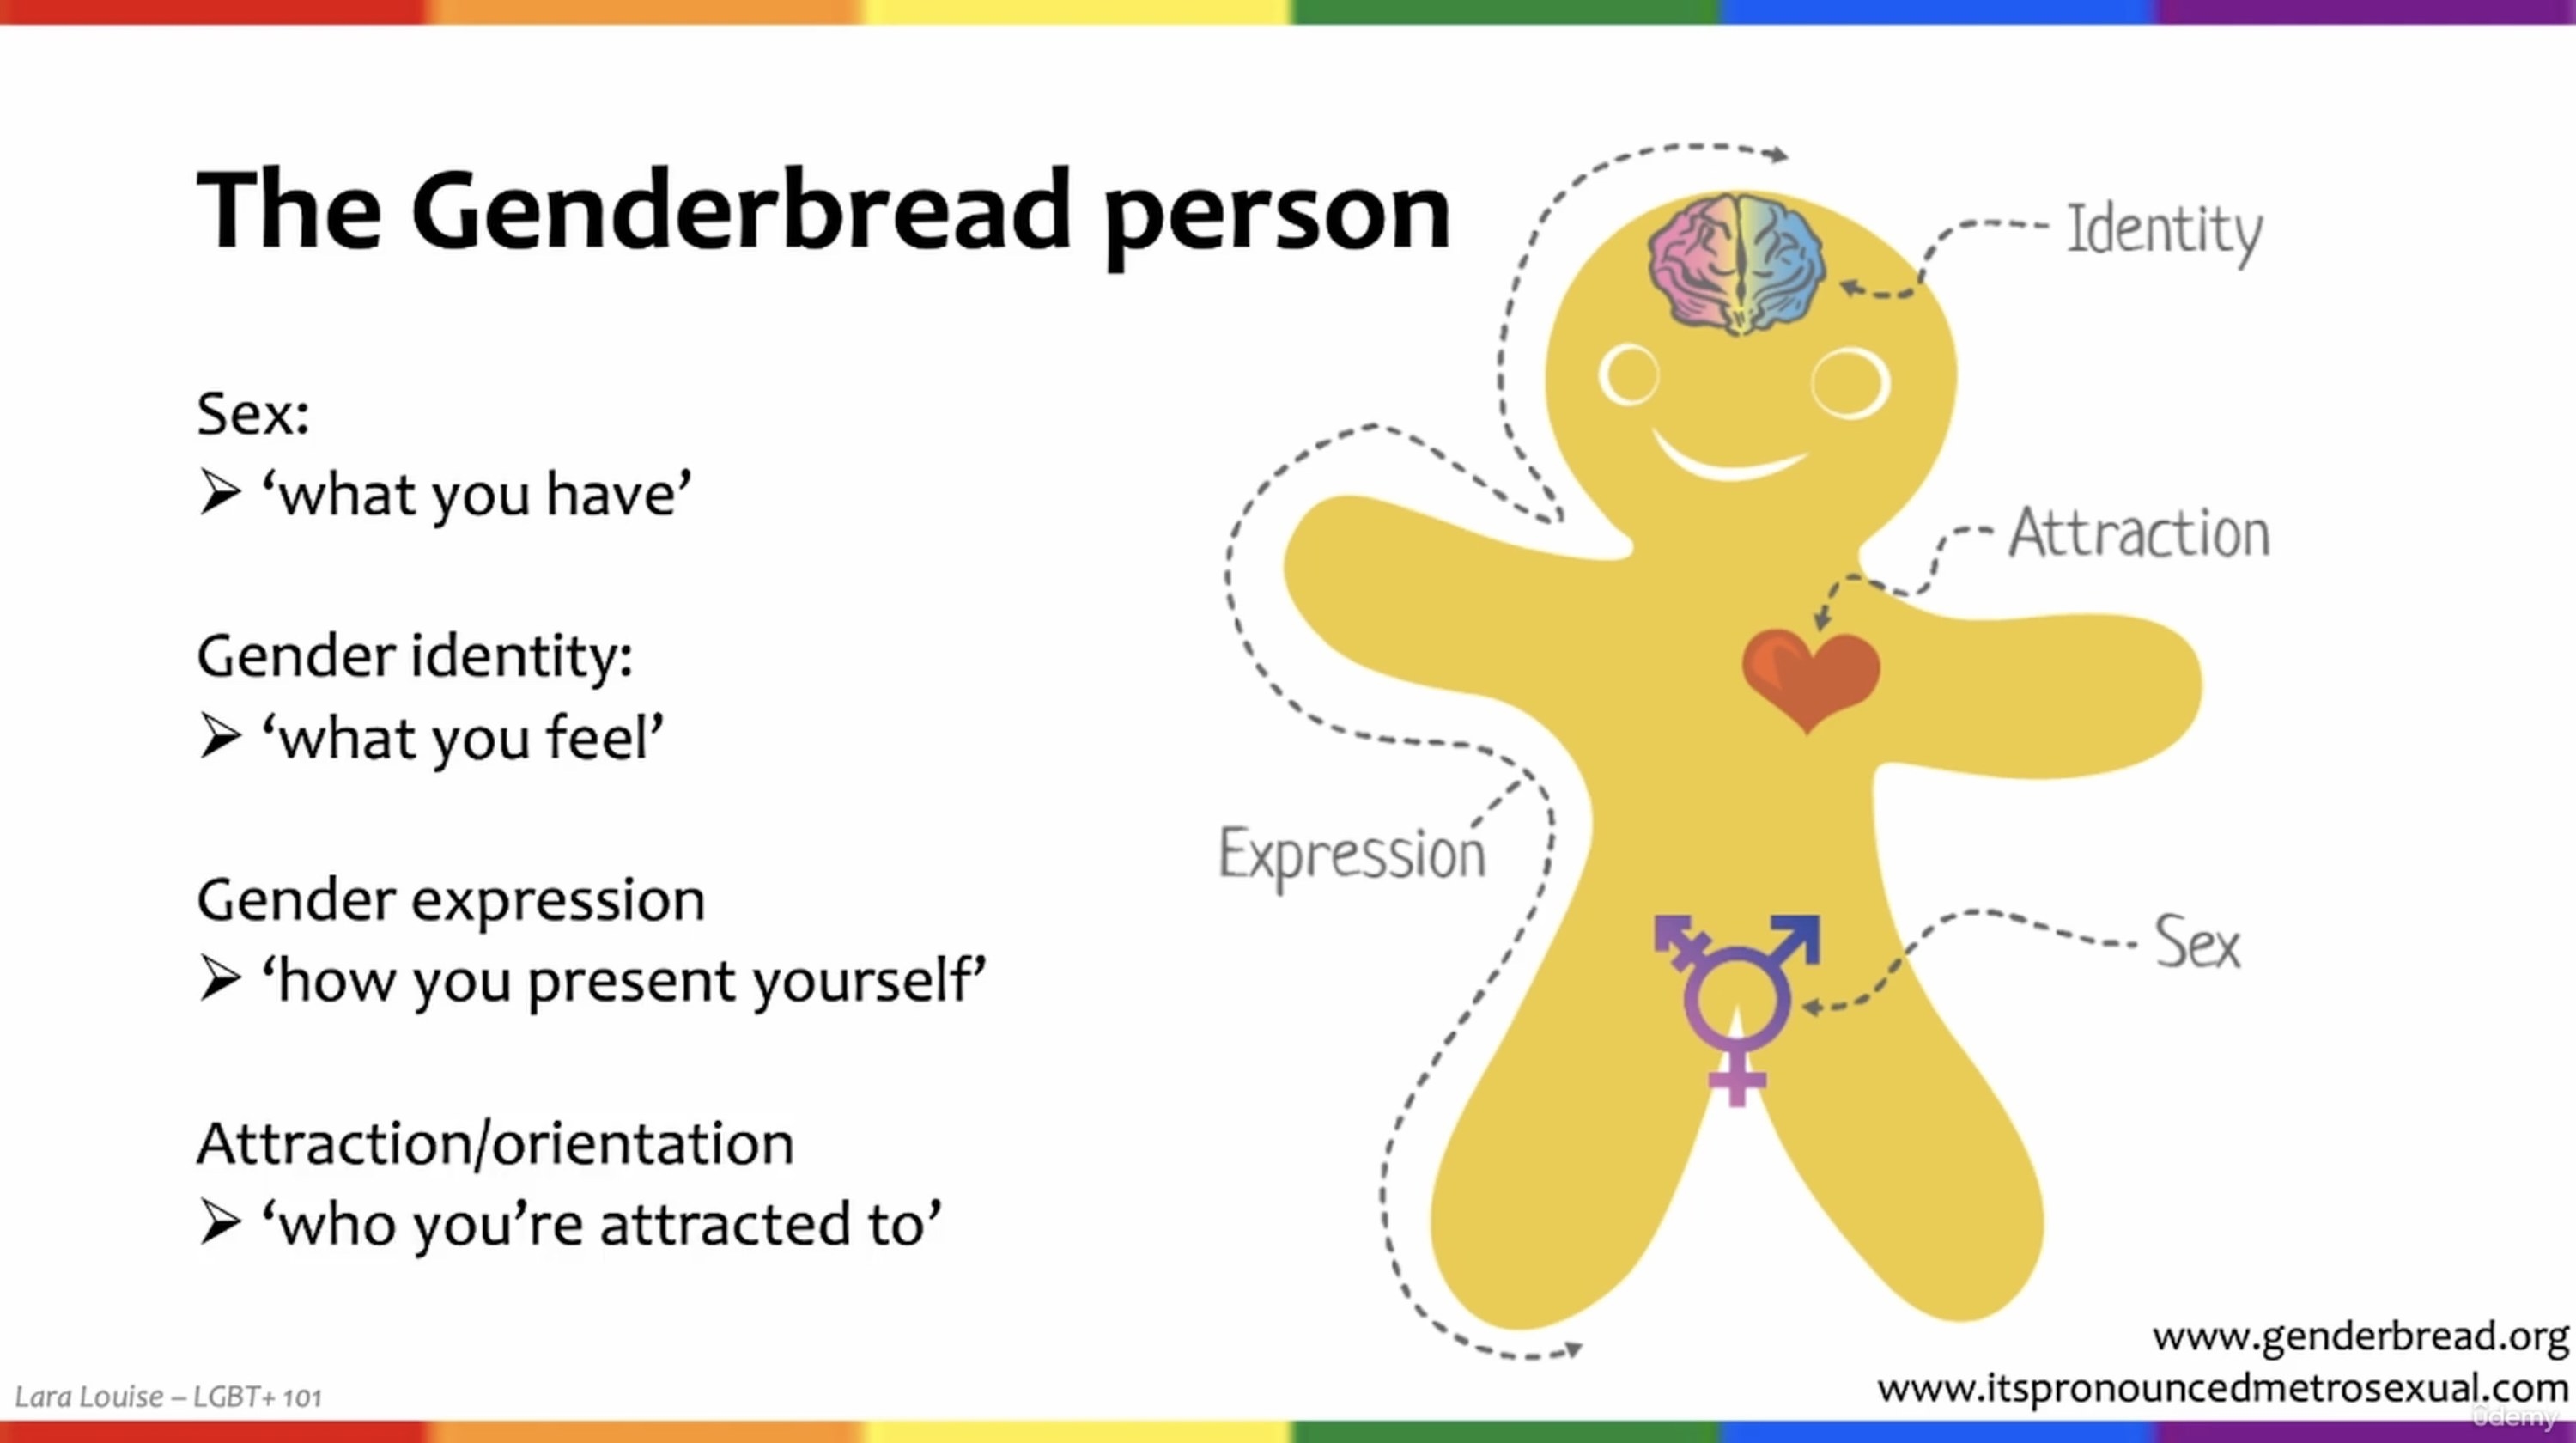 udemy course explaining the concepts of gender identity &amp;amp; expression, and sexual attraction